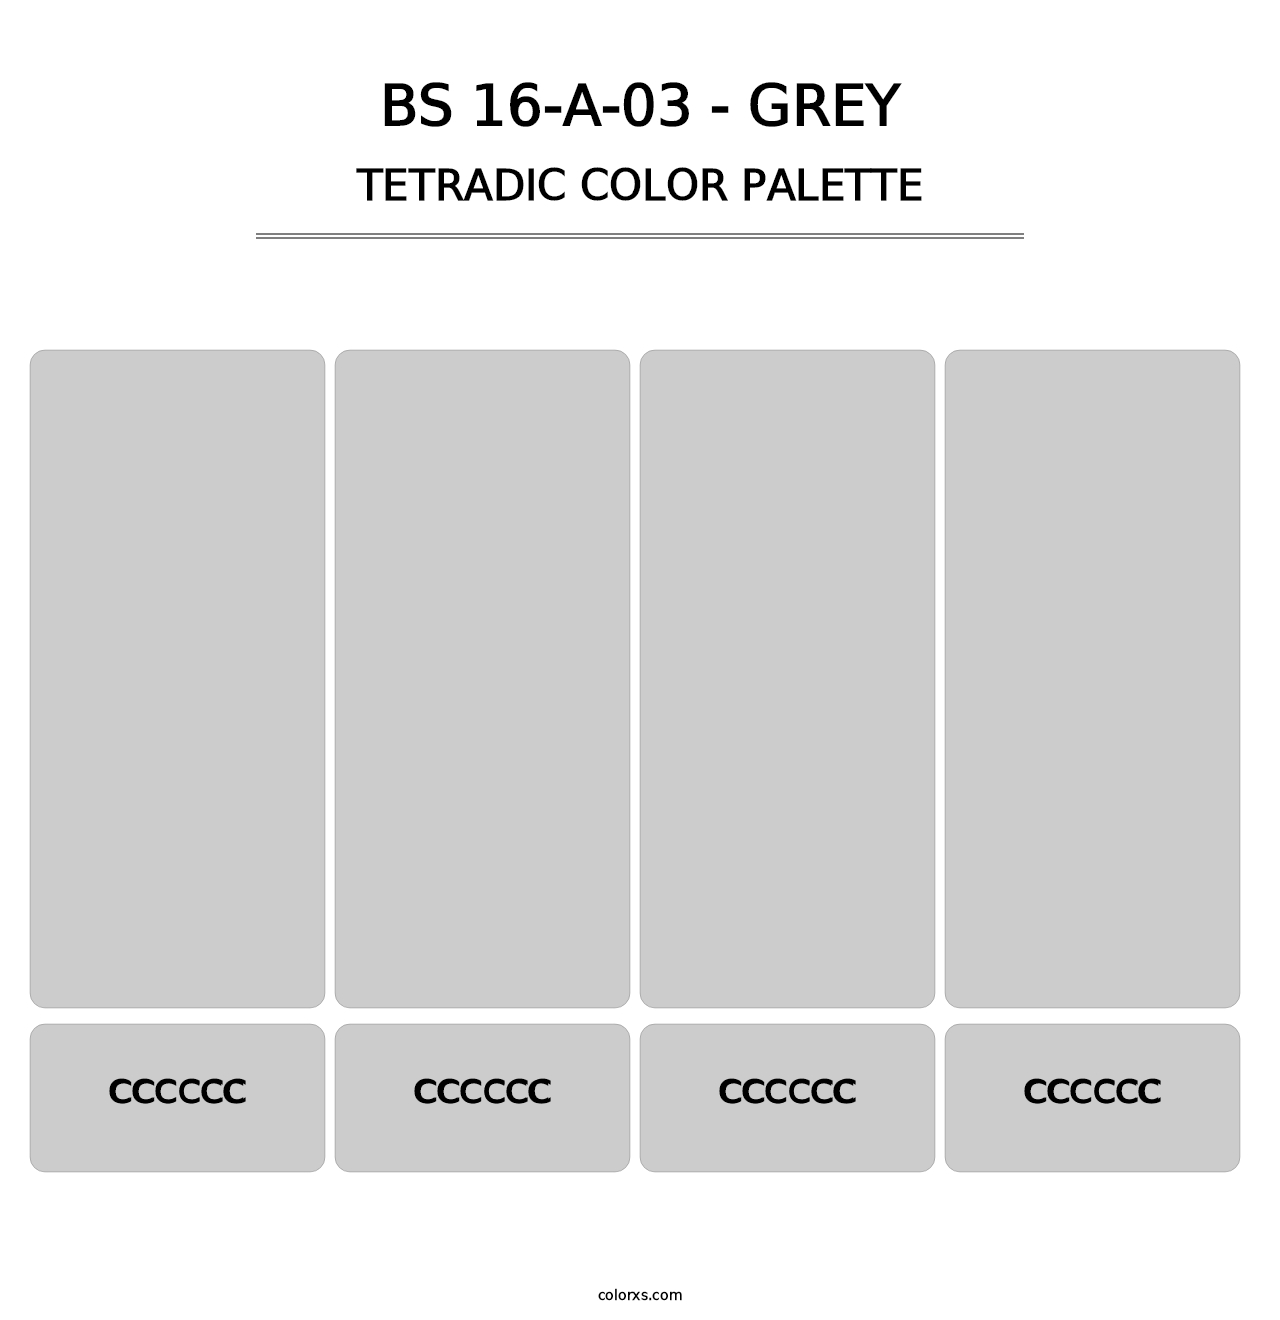 BS 16-A-03 - Grey - Tetradic Color Palette